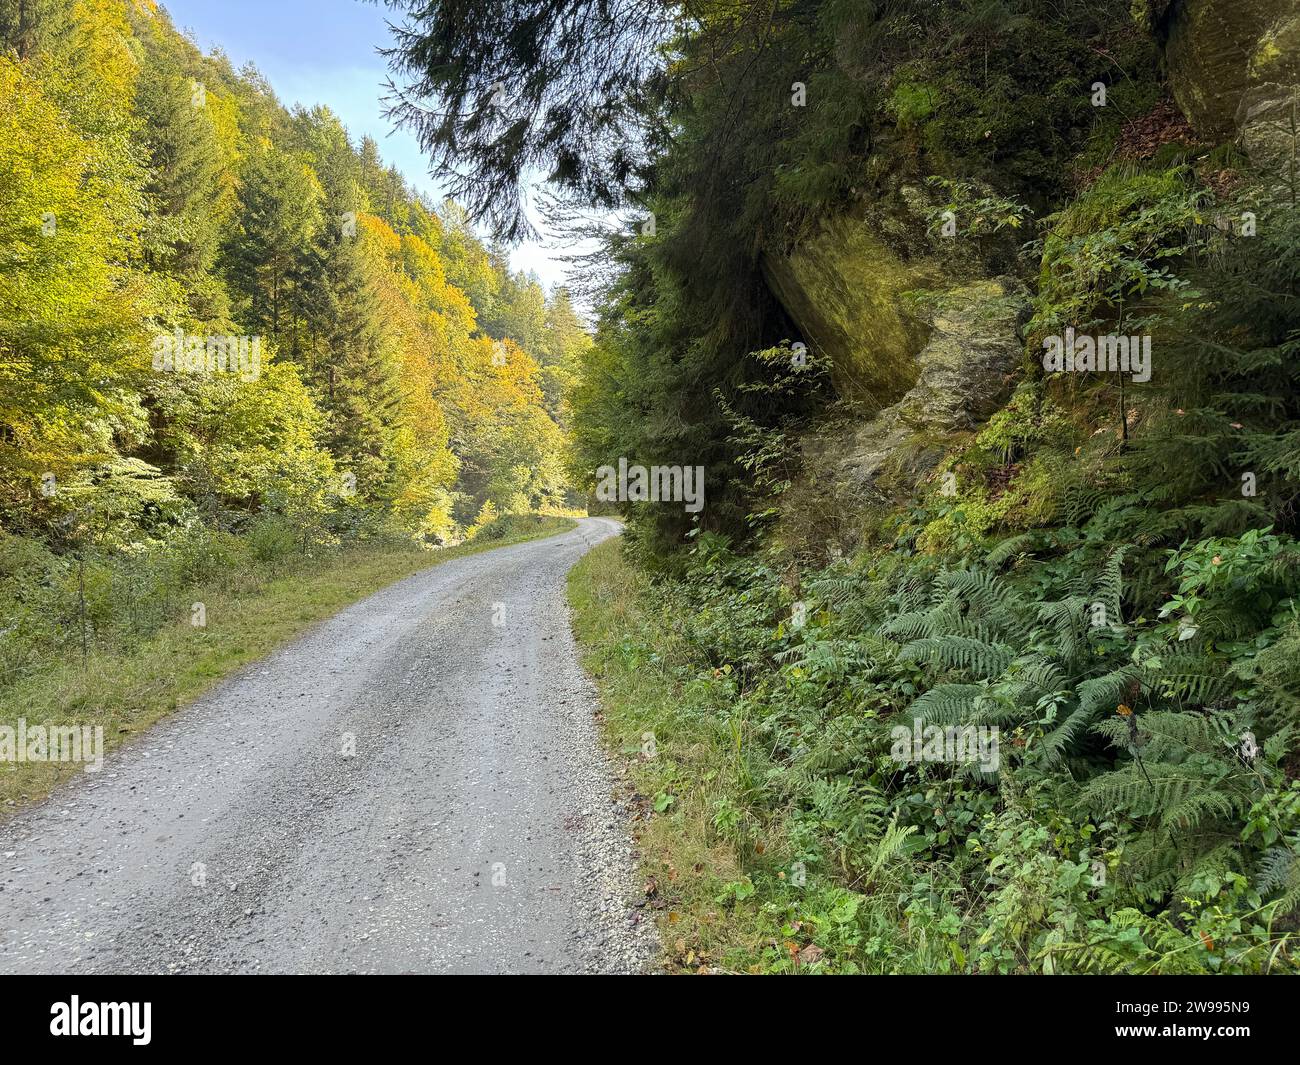 A winding, road traversing a lush forest, snaking between the trees in Transylvania forests, Romania Stock Photo